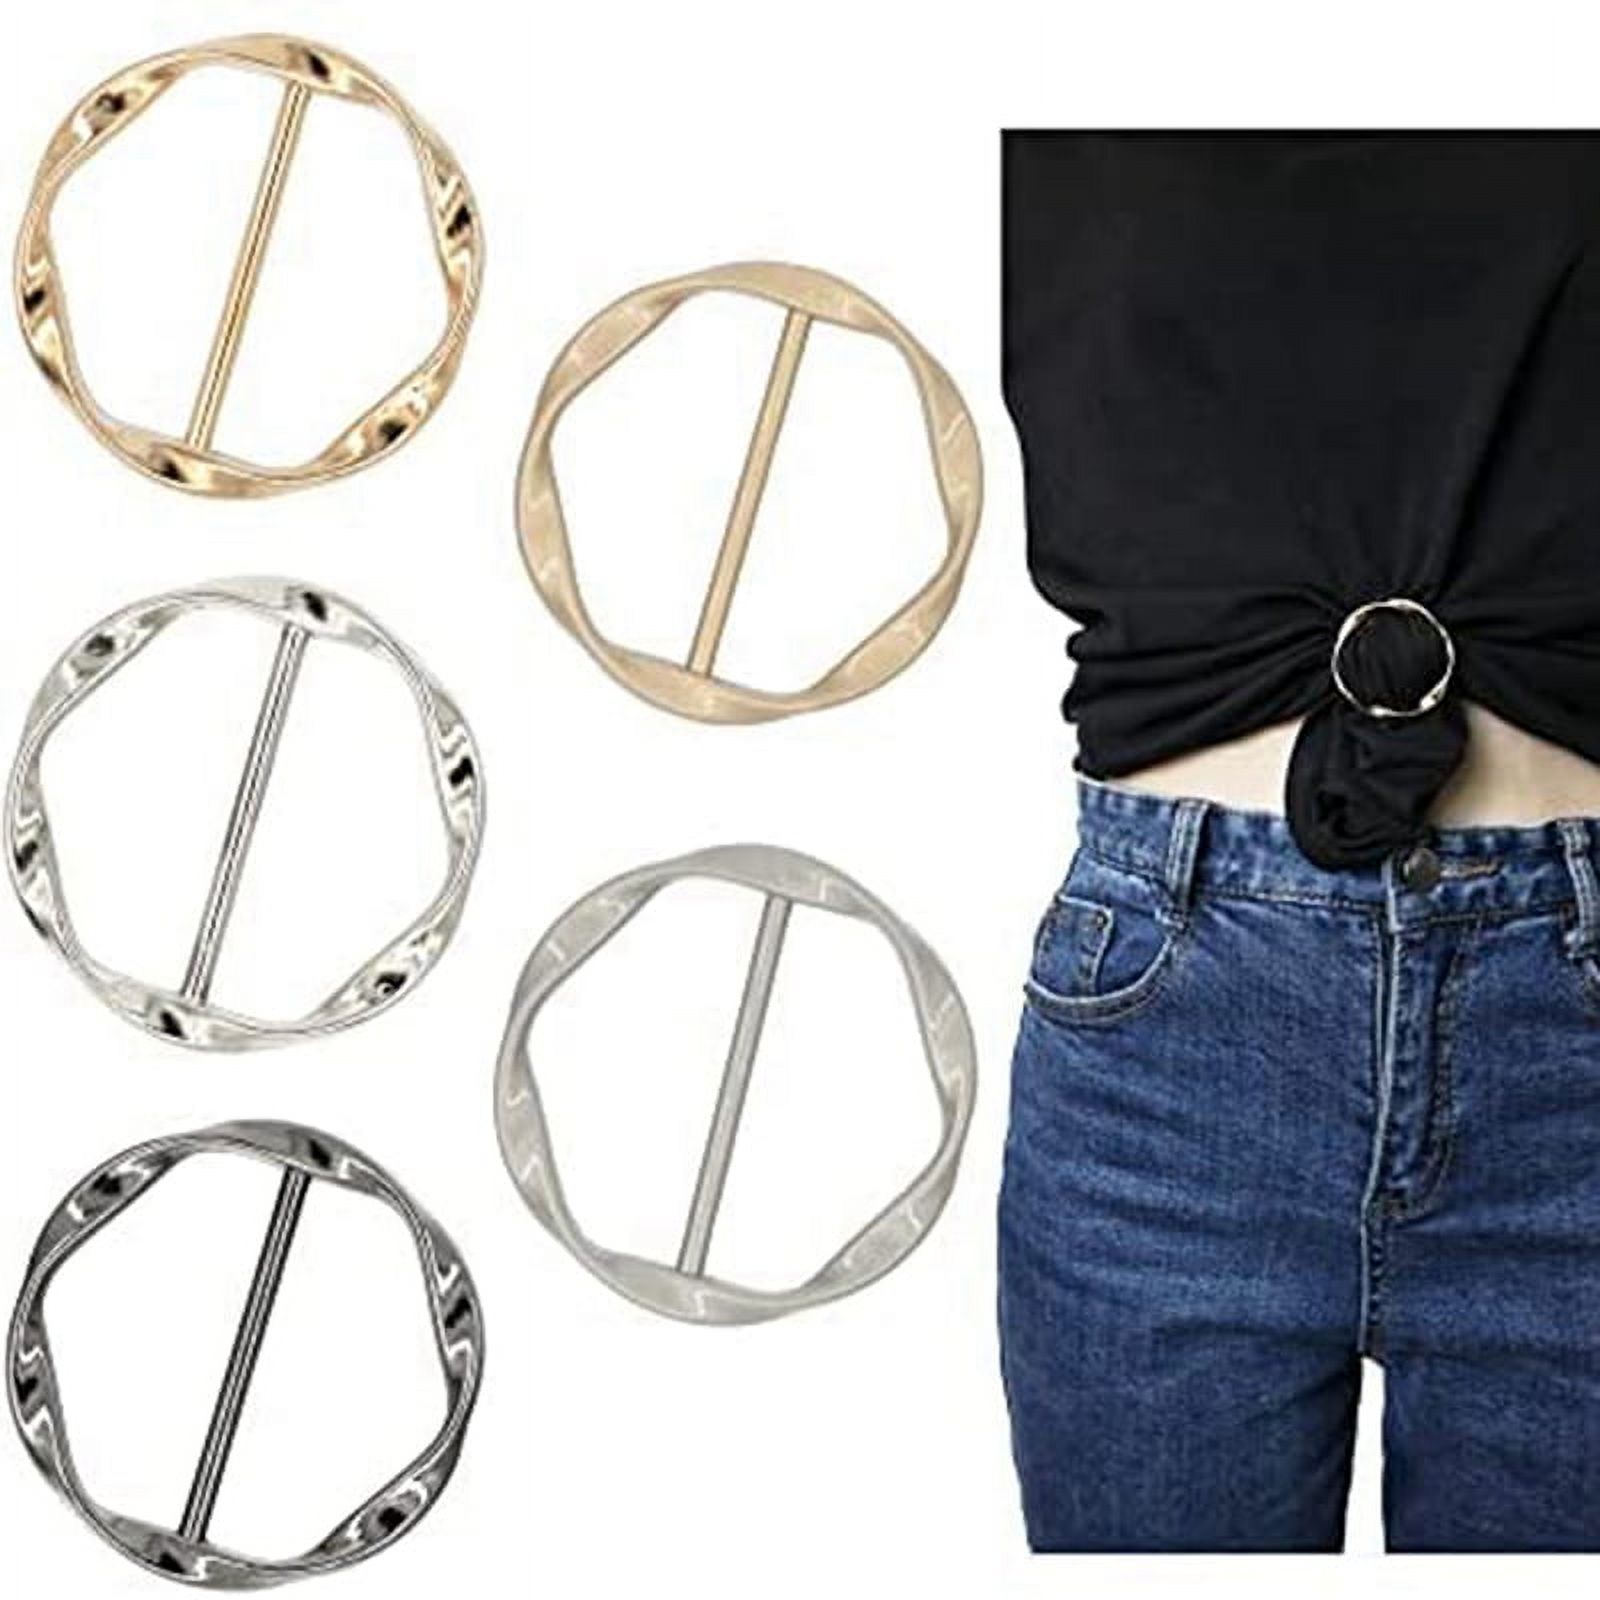 5 PCS Scarf Ring Clip Tie Ring Clips for Tshirt Twist Knot Clip Buckle  Circle Clothing Ring Wrap Holder